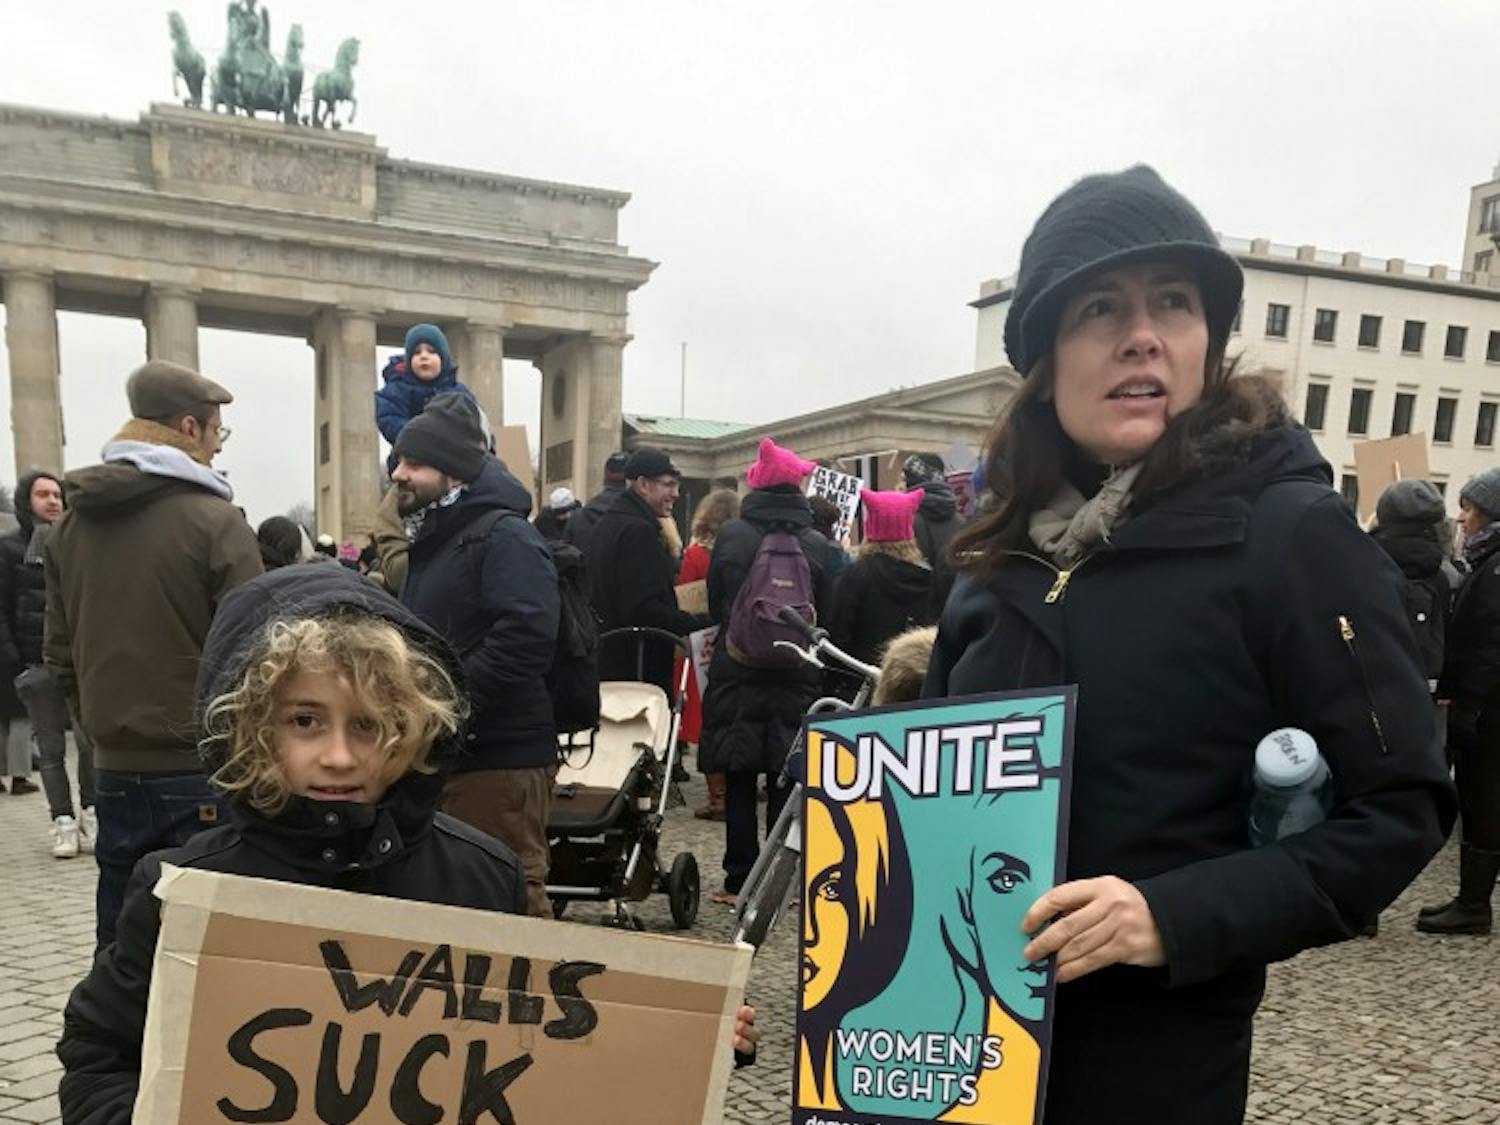 A ten-year-old in front of the Brandenburg Gate holds a protest sign reading "Walls suck / Ask a Berliner" at the Women's March. Berliners view Trump with concern since the United States is important to Germany.